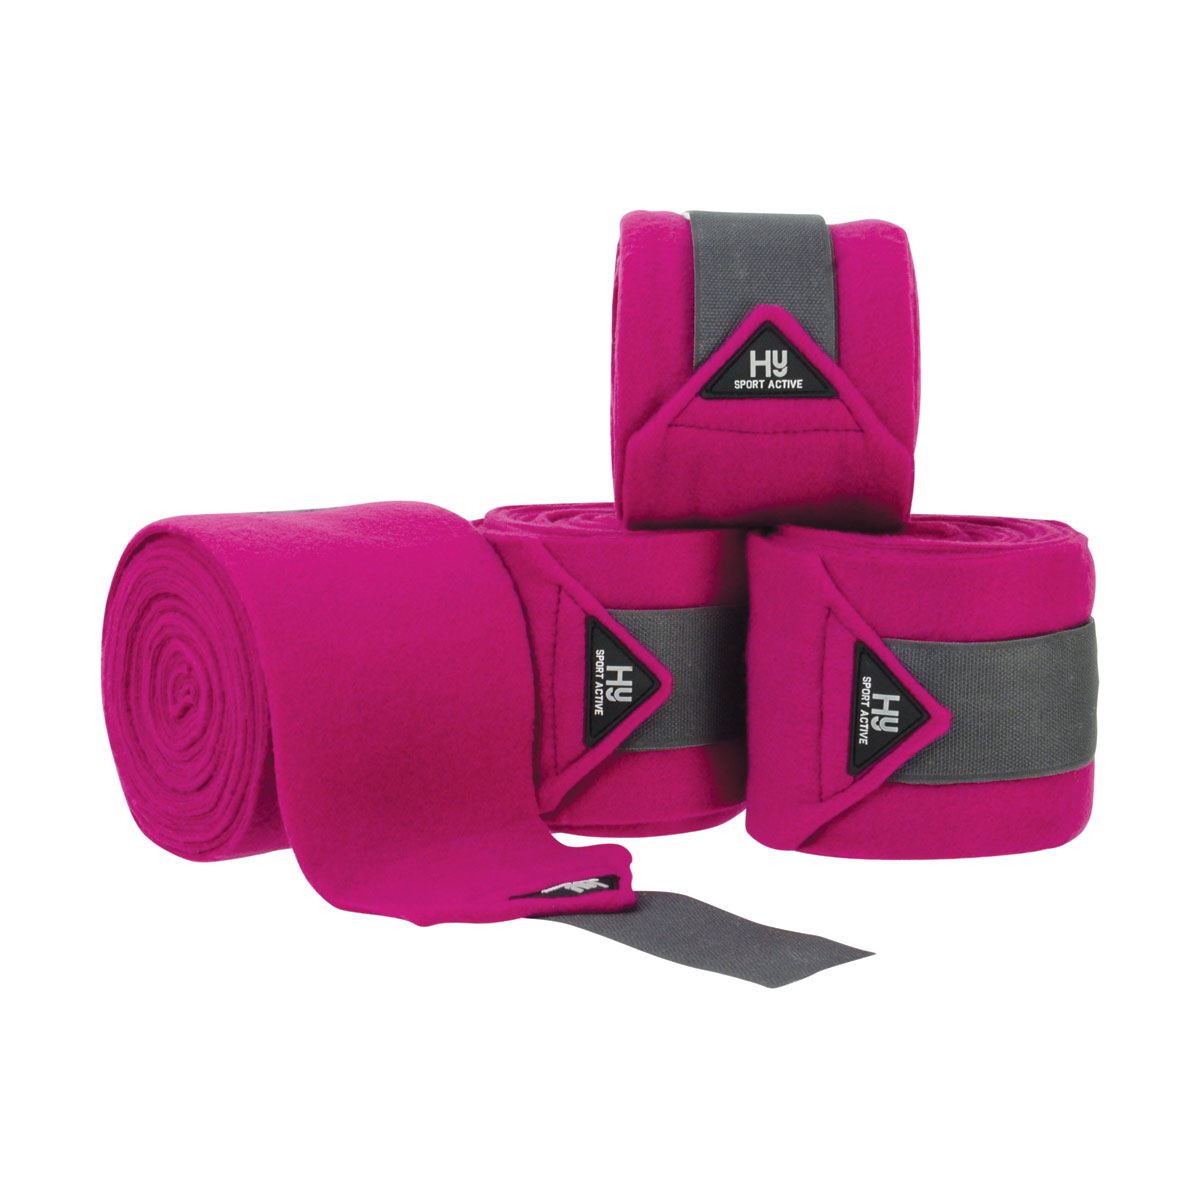 Hy Sport Active Luxury Bandages - Just Horse Riders